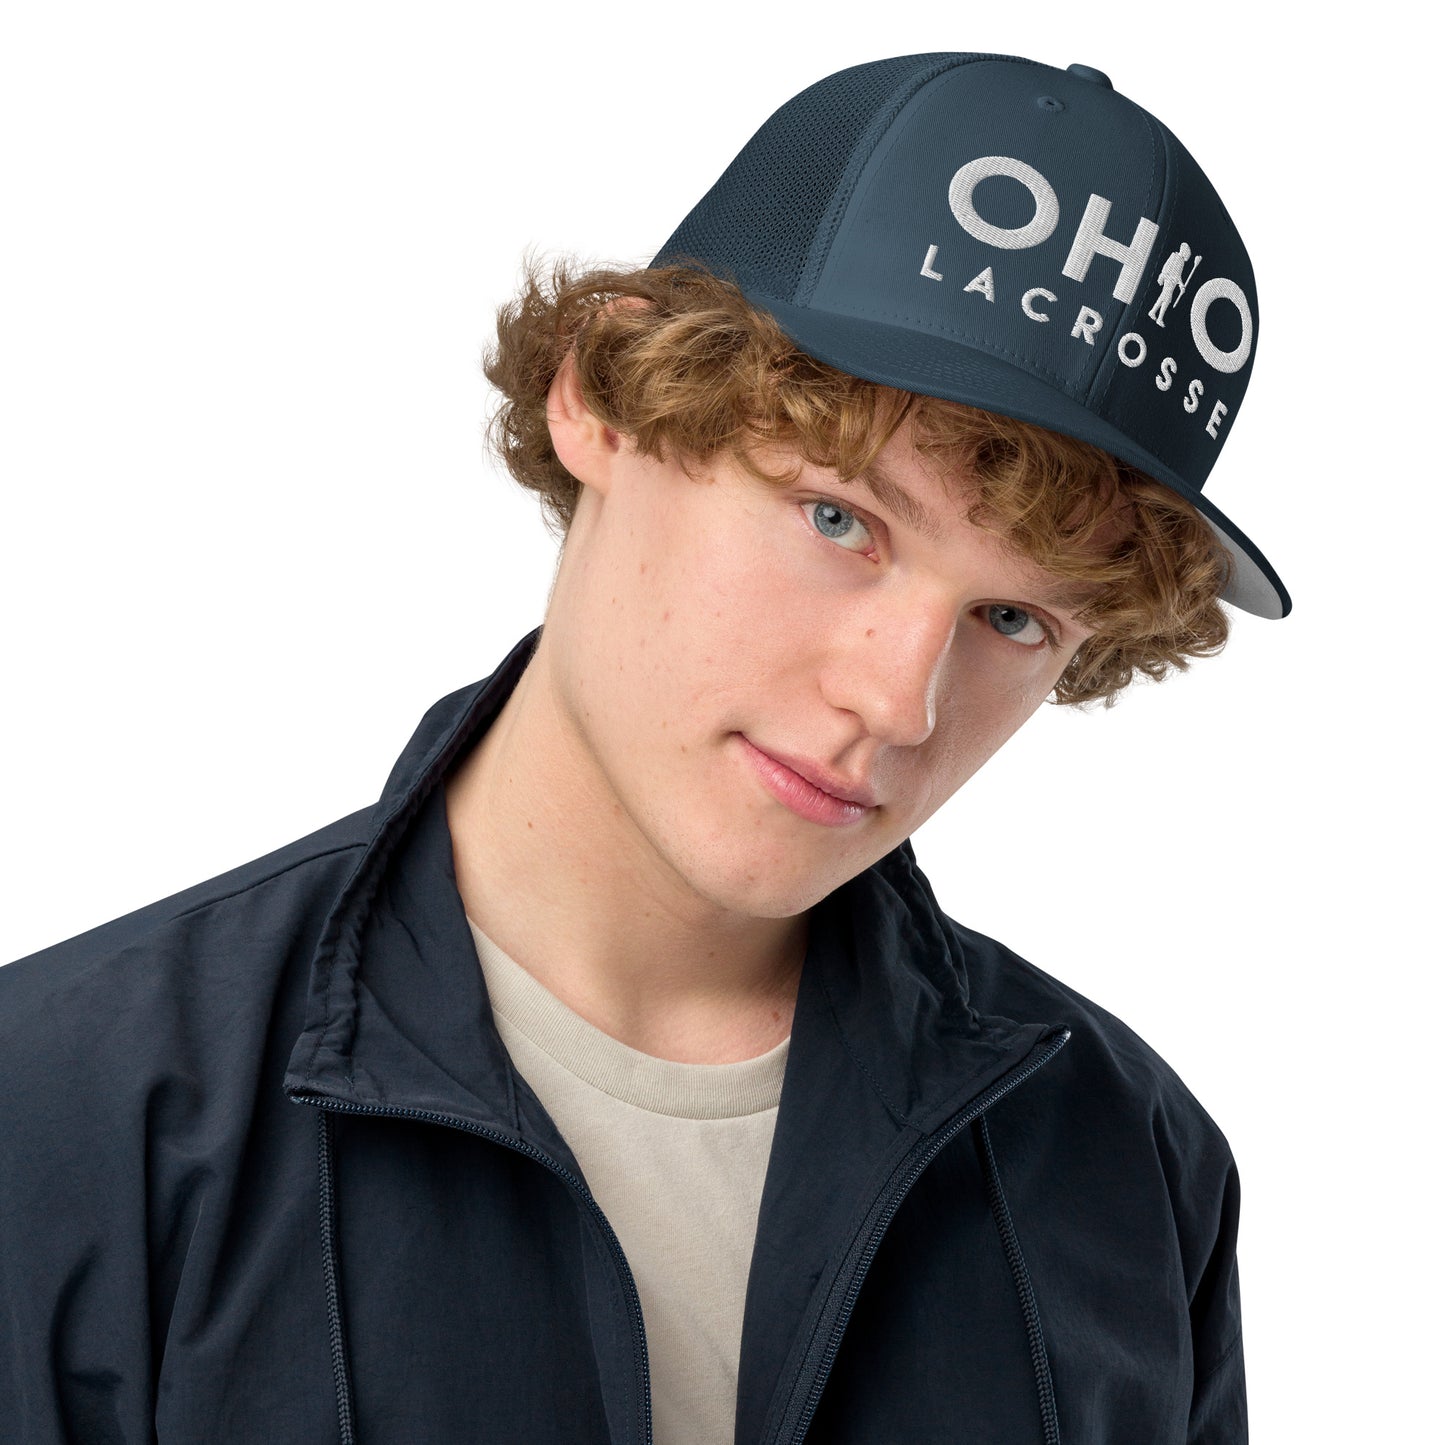 OH LACROSSE (Player substitution)-Closed-back trucker cap